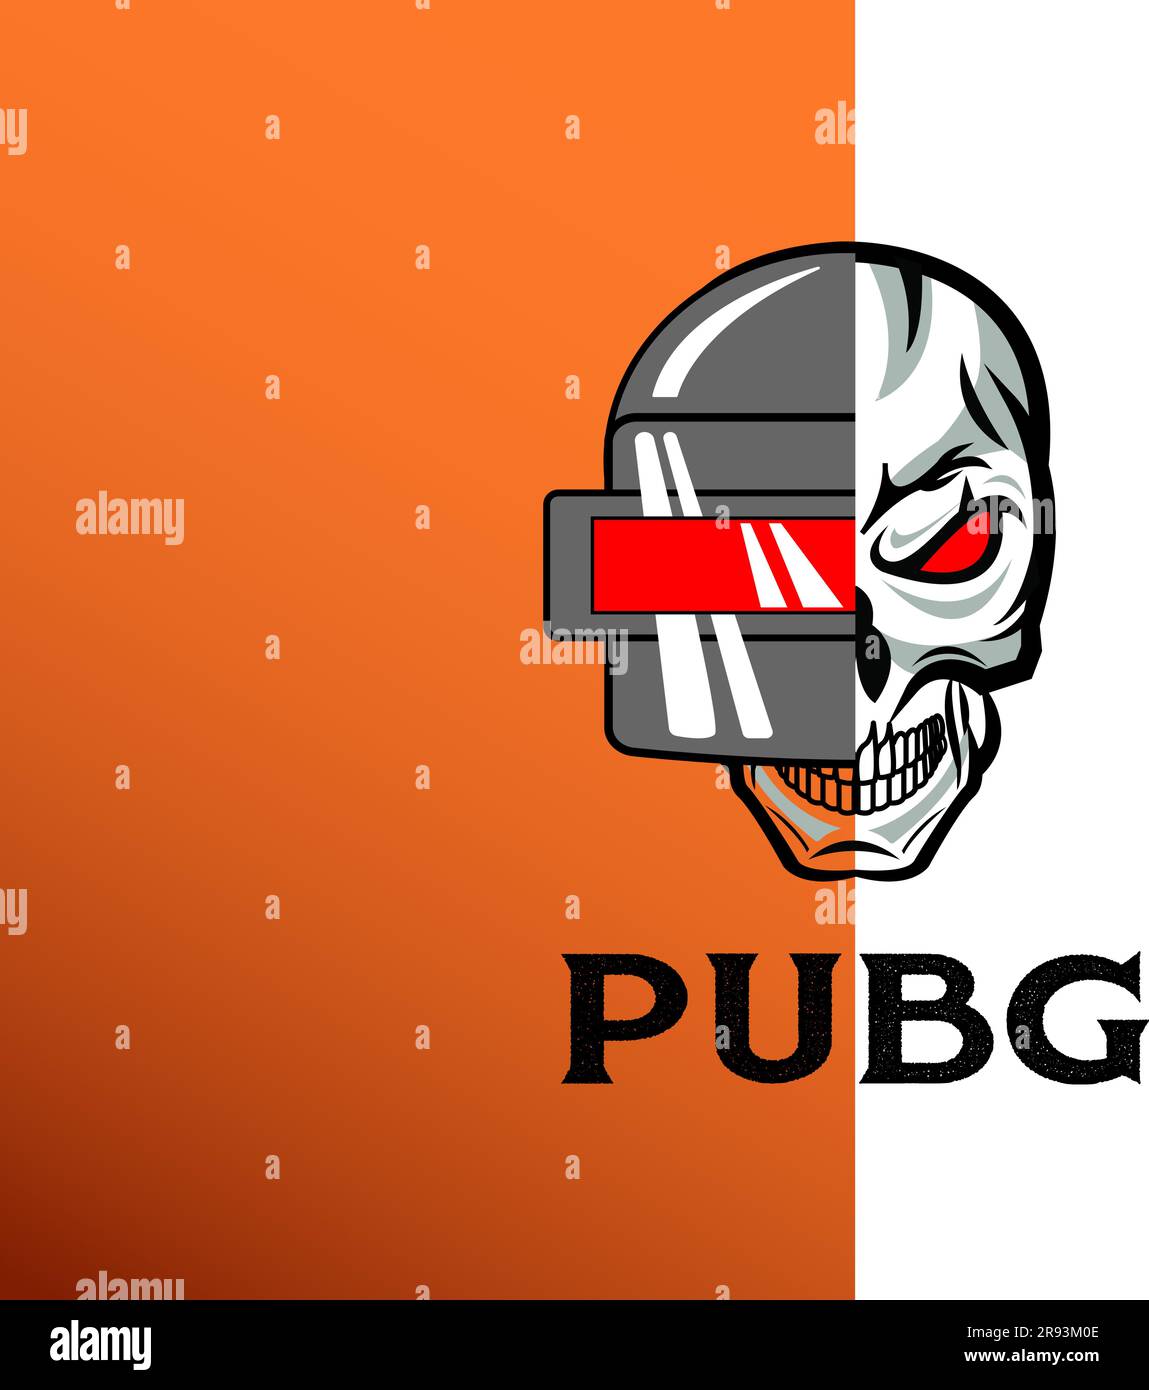 A squad of 4 player pubg Royalty Free Vector Image